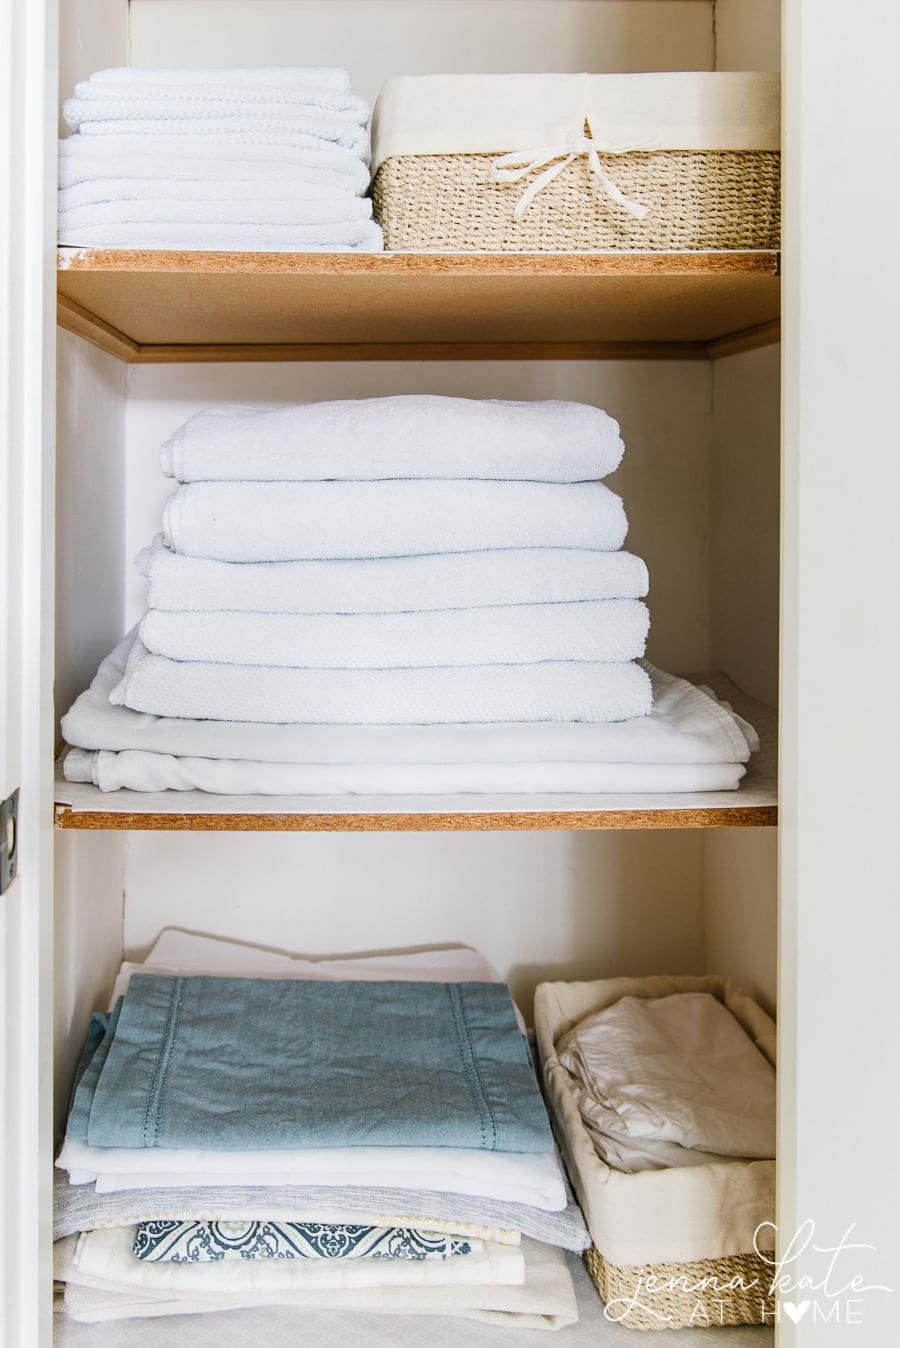 A stack of towels on a shelf of the linen closet